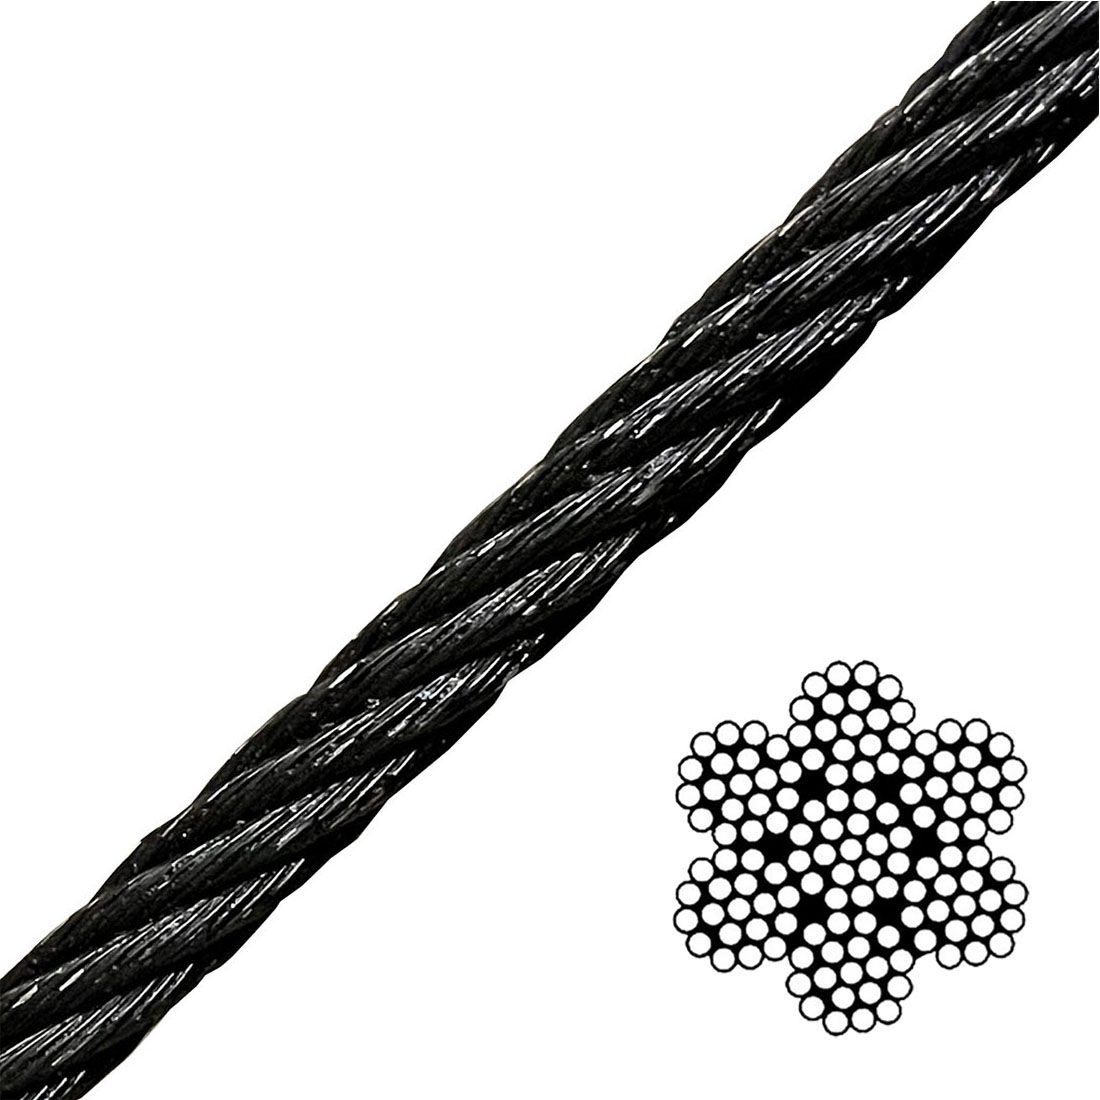 Aircraft Cable & Wire Rope